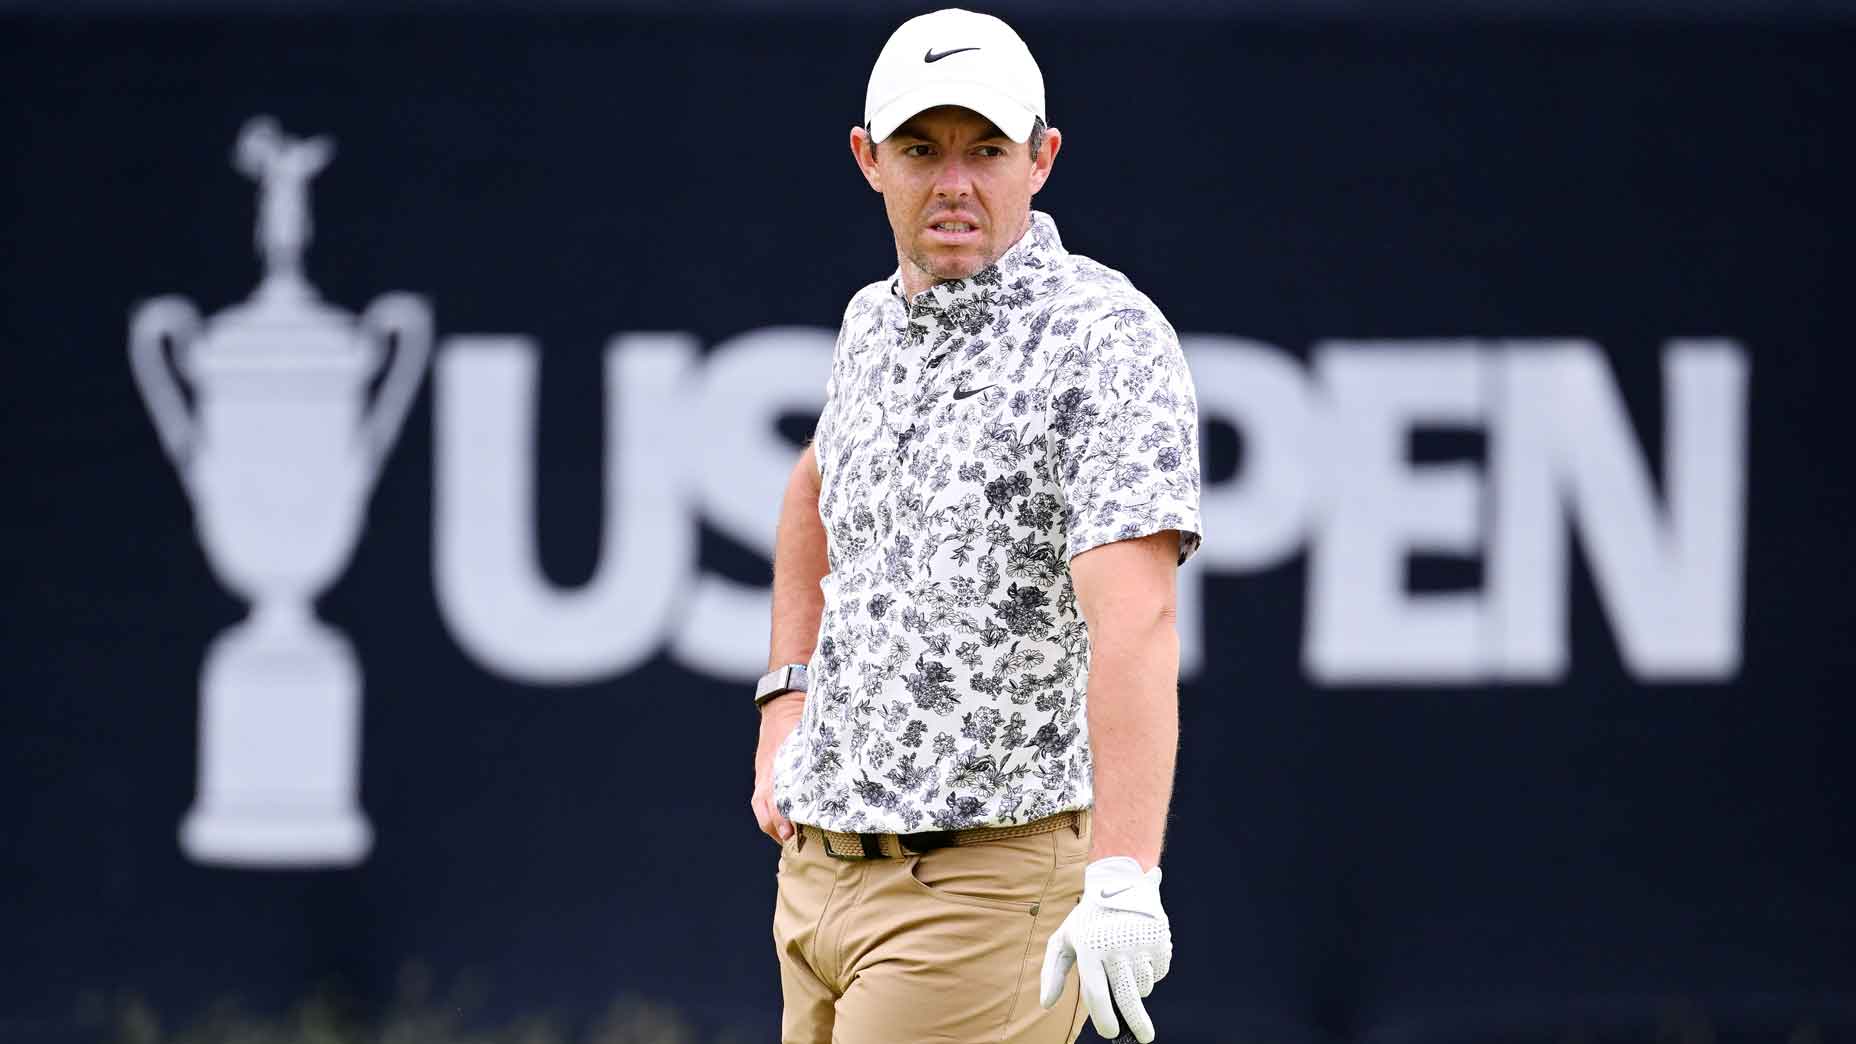 Rory on Koepka, LIV defectors: They say one thing and do another